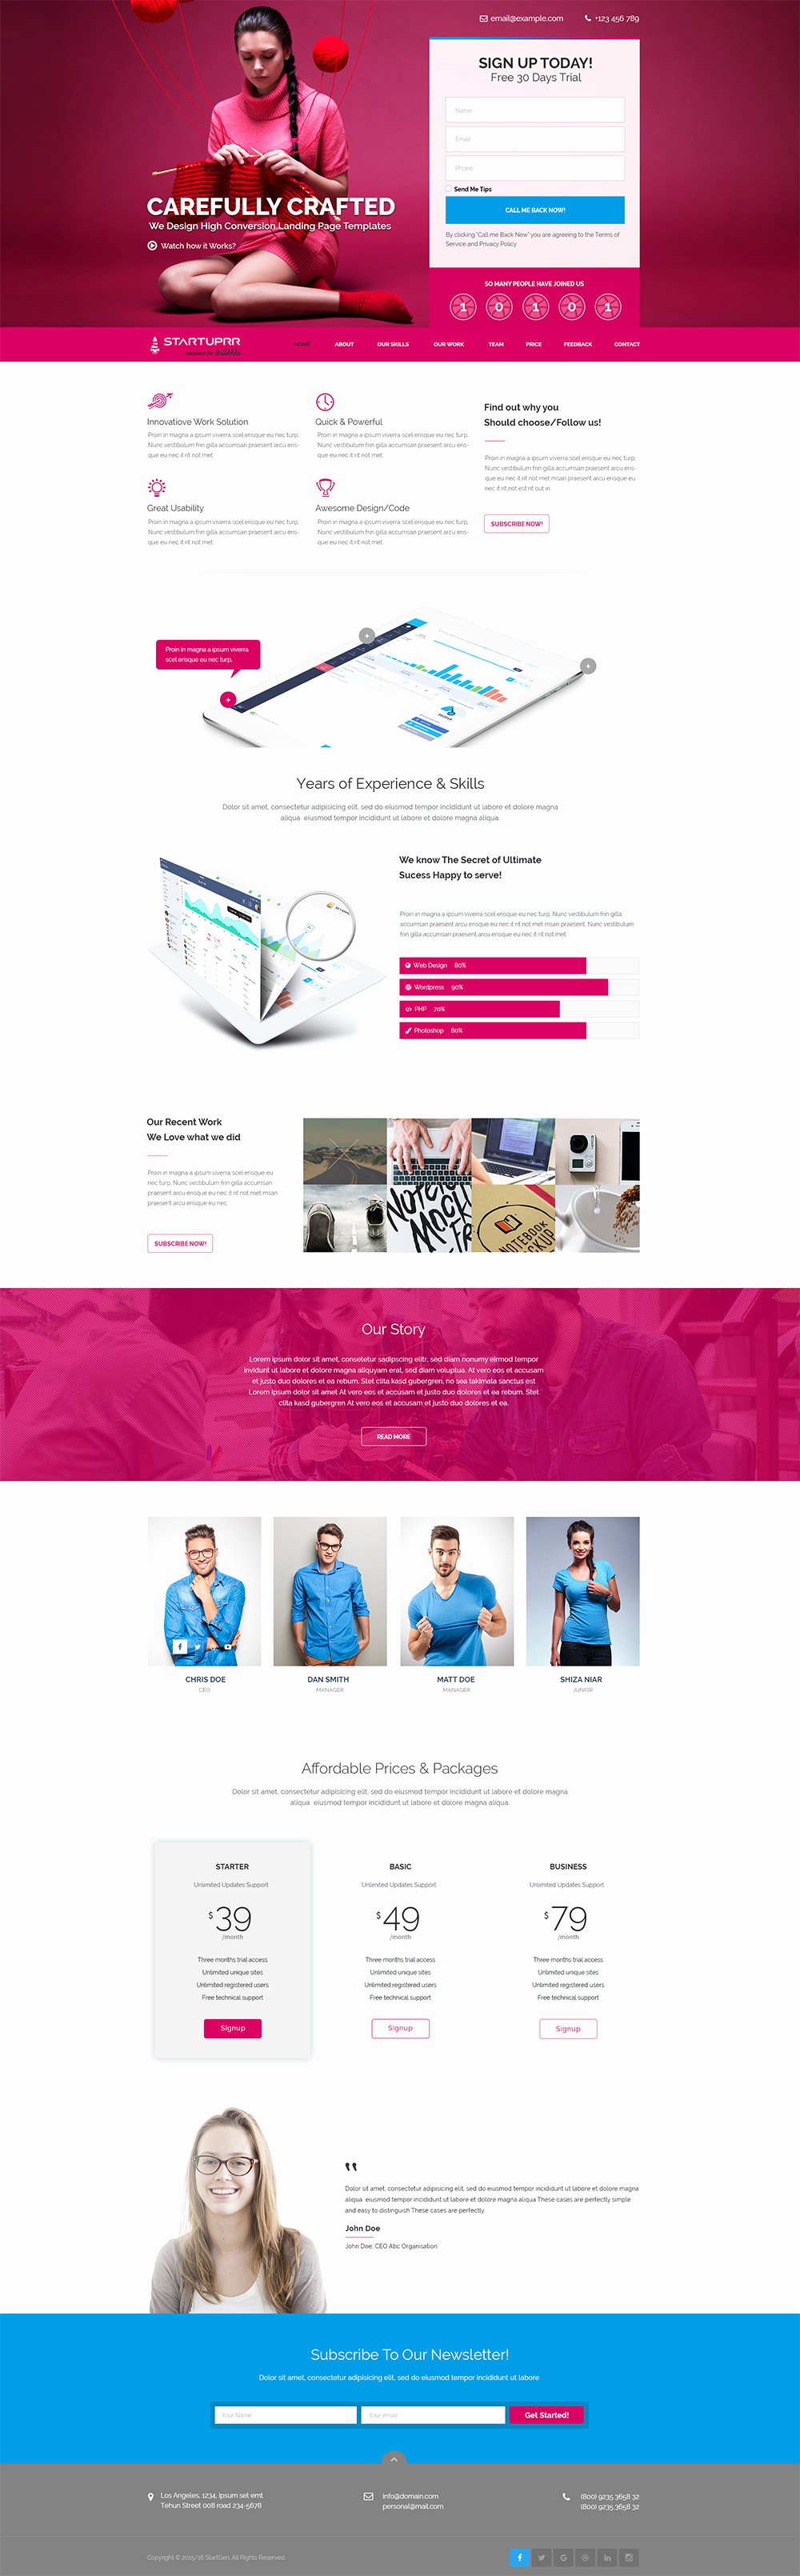 High Quality 50 Free Corporate and Business Web Templates